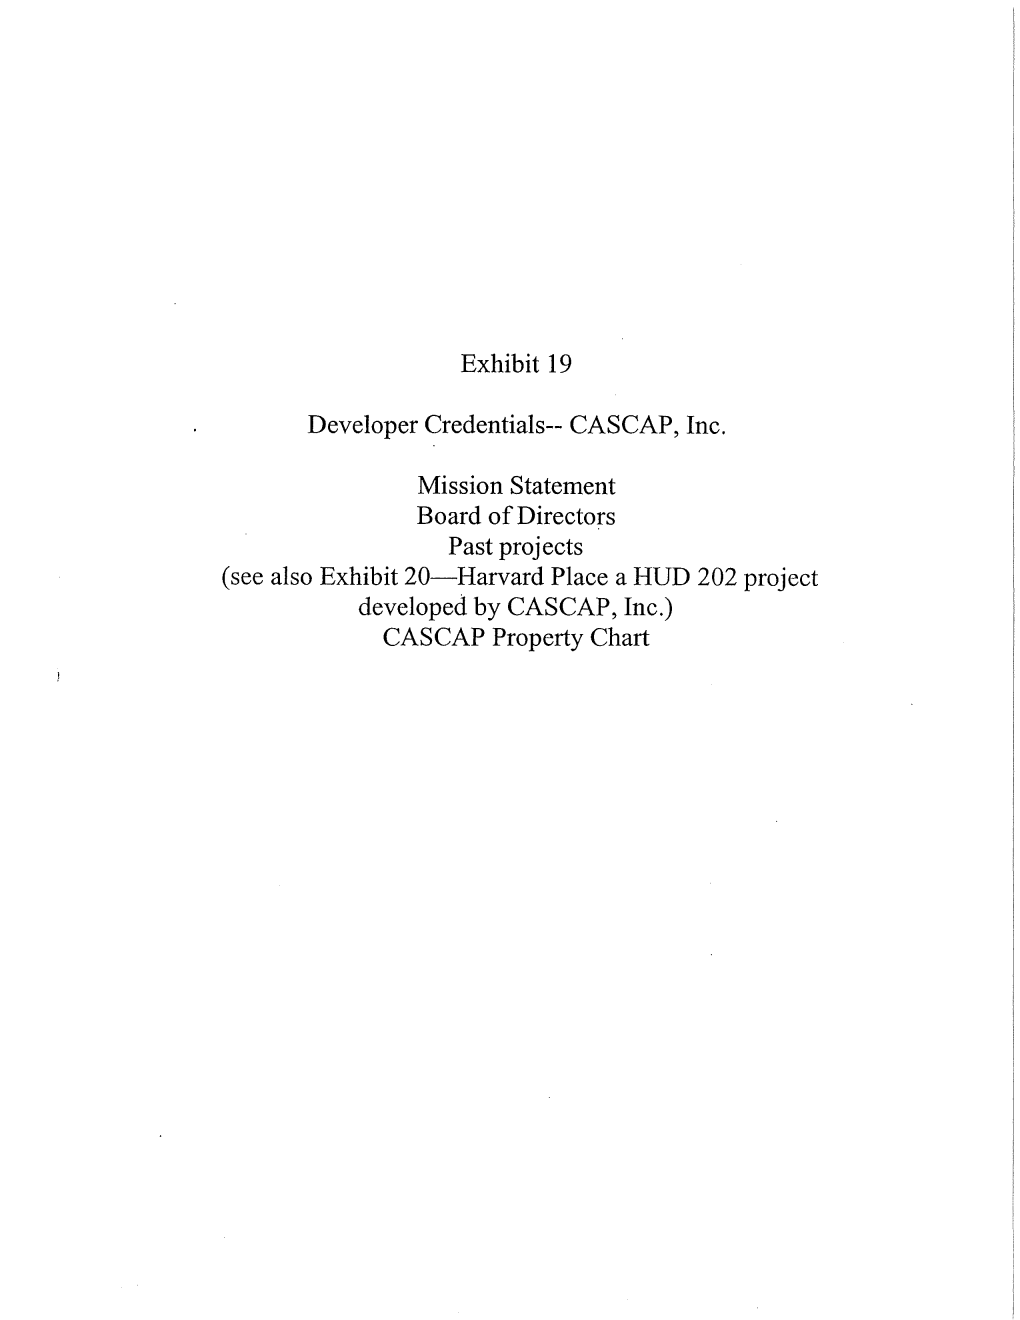 CASCAP, Inc. Mission Statement Board of Directors Past Projects